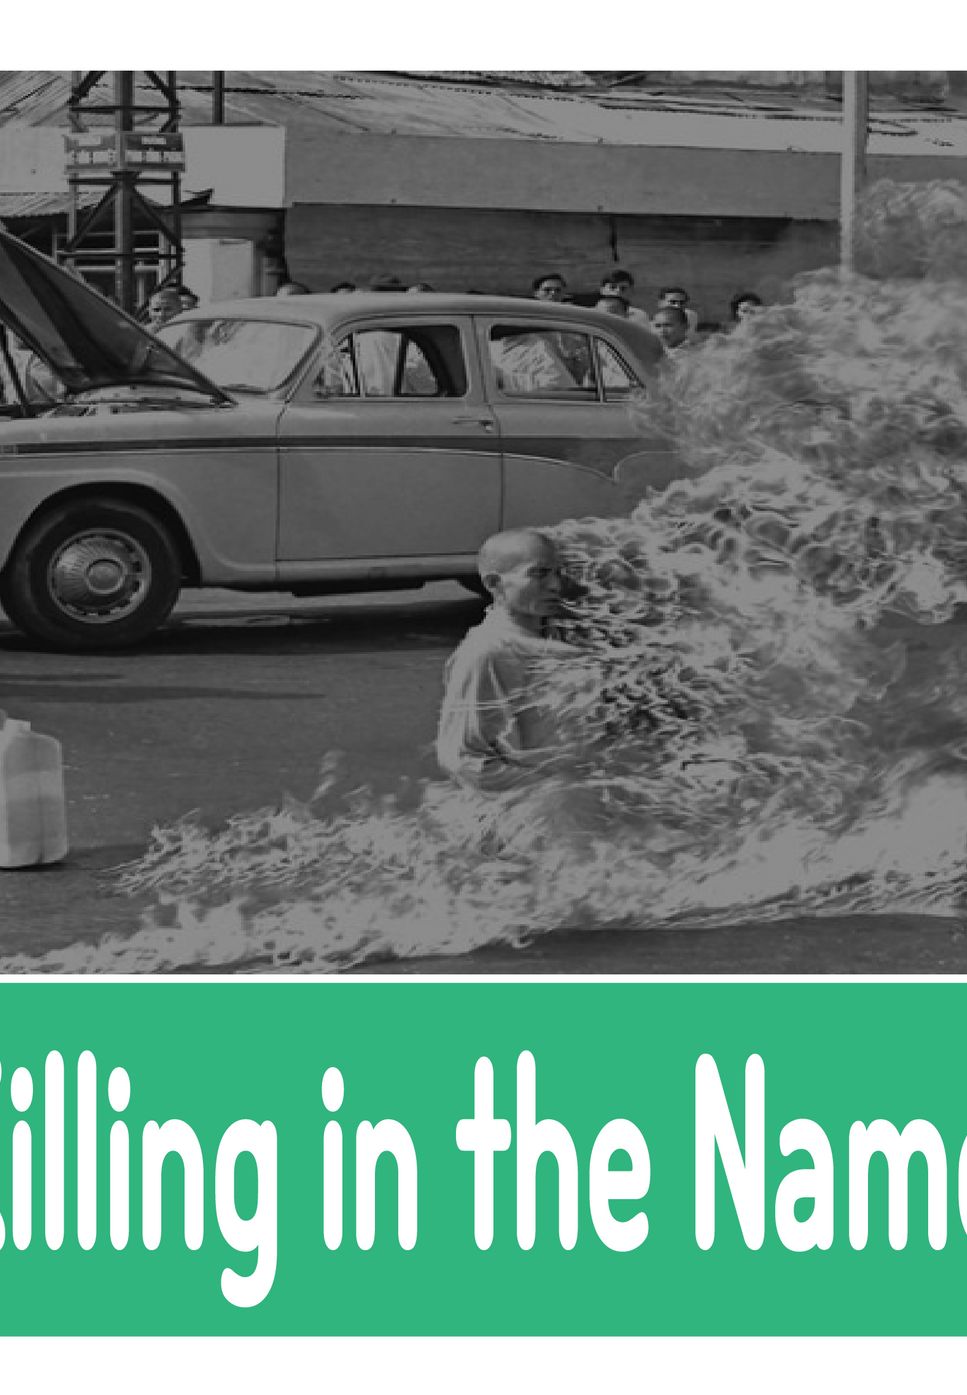 rage against the machine - Killing In the Name by @yundy_tm